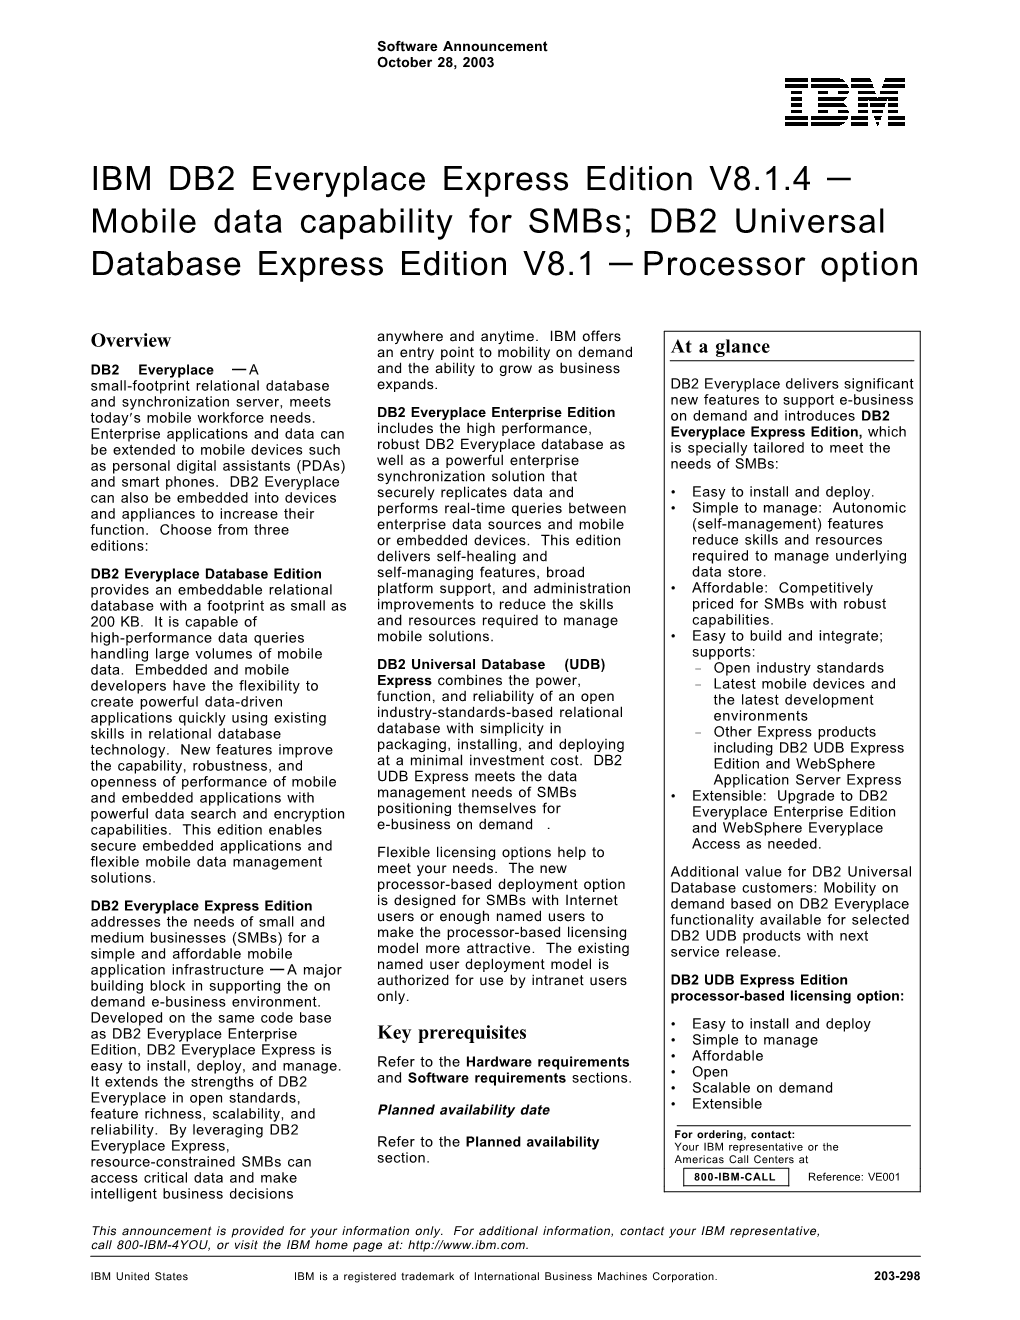 IBM DB2 Everyplace Express Edition V8.1.4 — Mobile Data Capability for Smbs; DB2 Universal Database Express Edition V8.1 — Processor Option